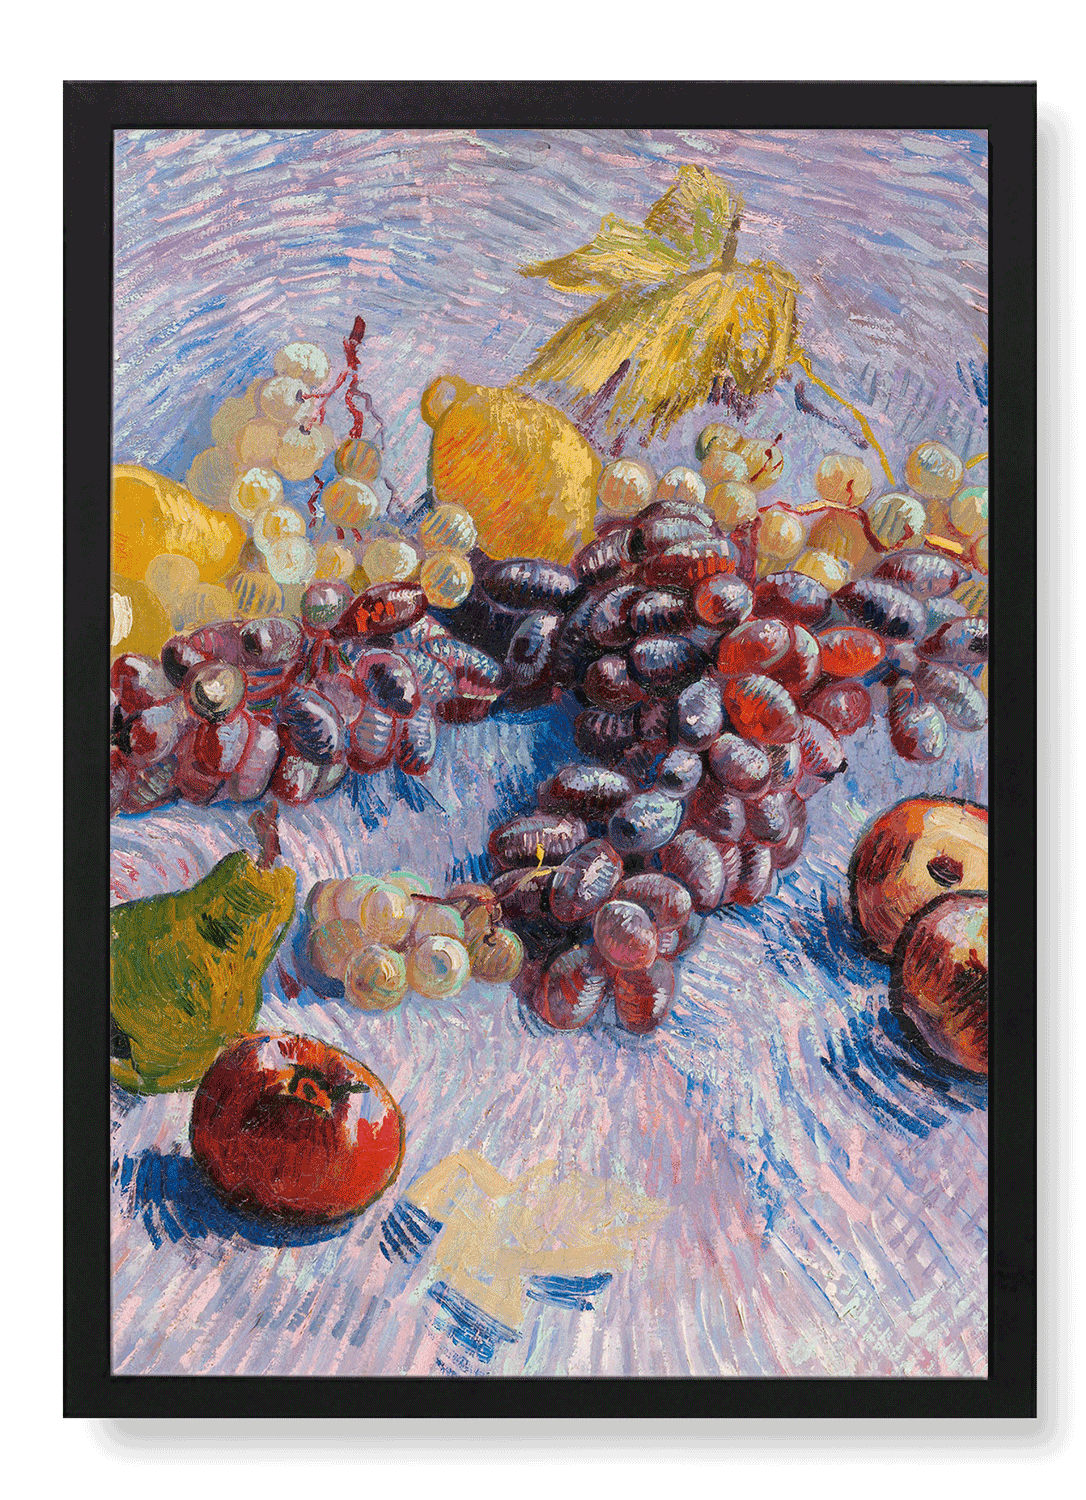 GRAPES, LEMONS, PEARS, AND APPLES (1887)